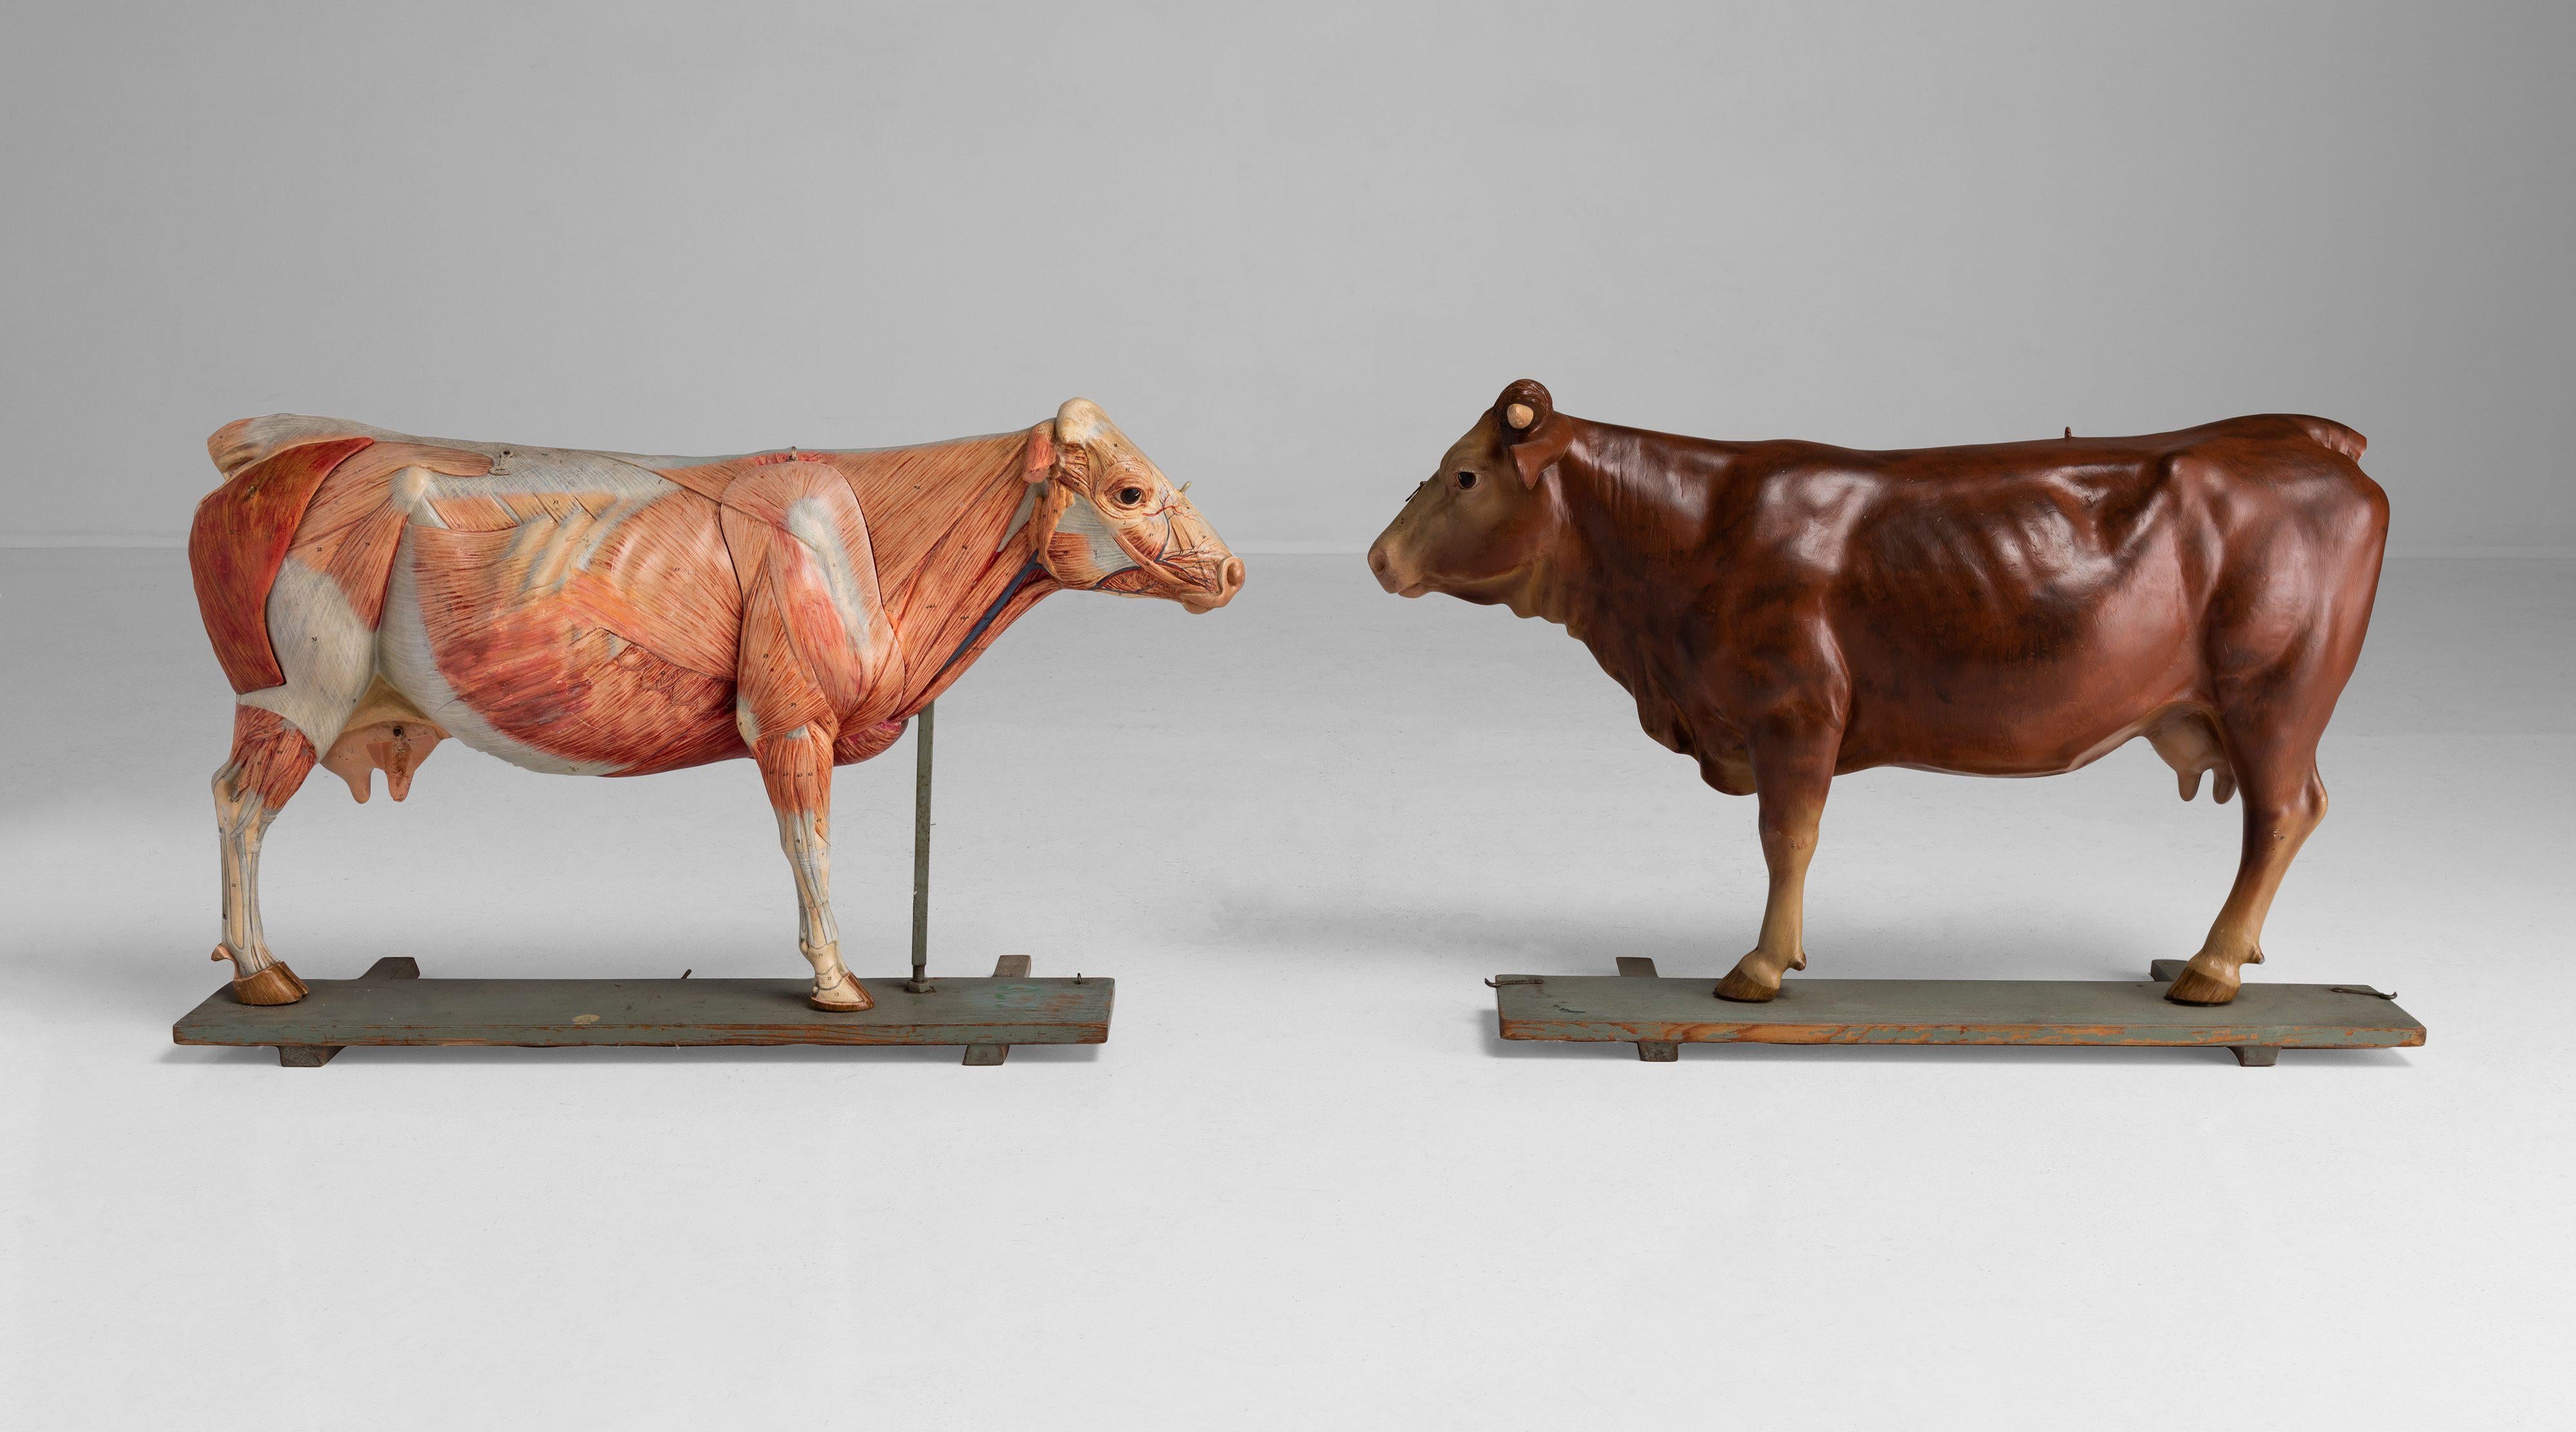 Rare hand painted papier-mâché model, manufactured by Somso. One side shows a beautiful realistic animal, and the other shows the musculature. Some organs are missing.


Measures: 34” W x 10” D x 21.5” H.